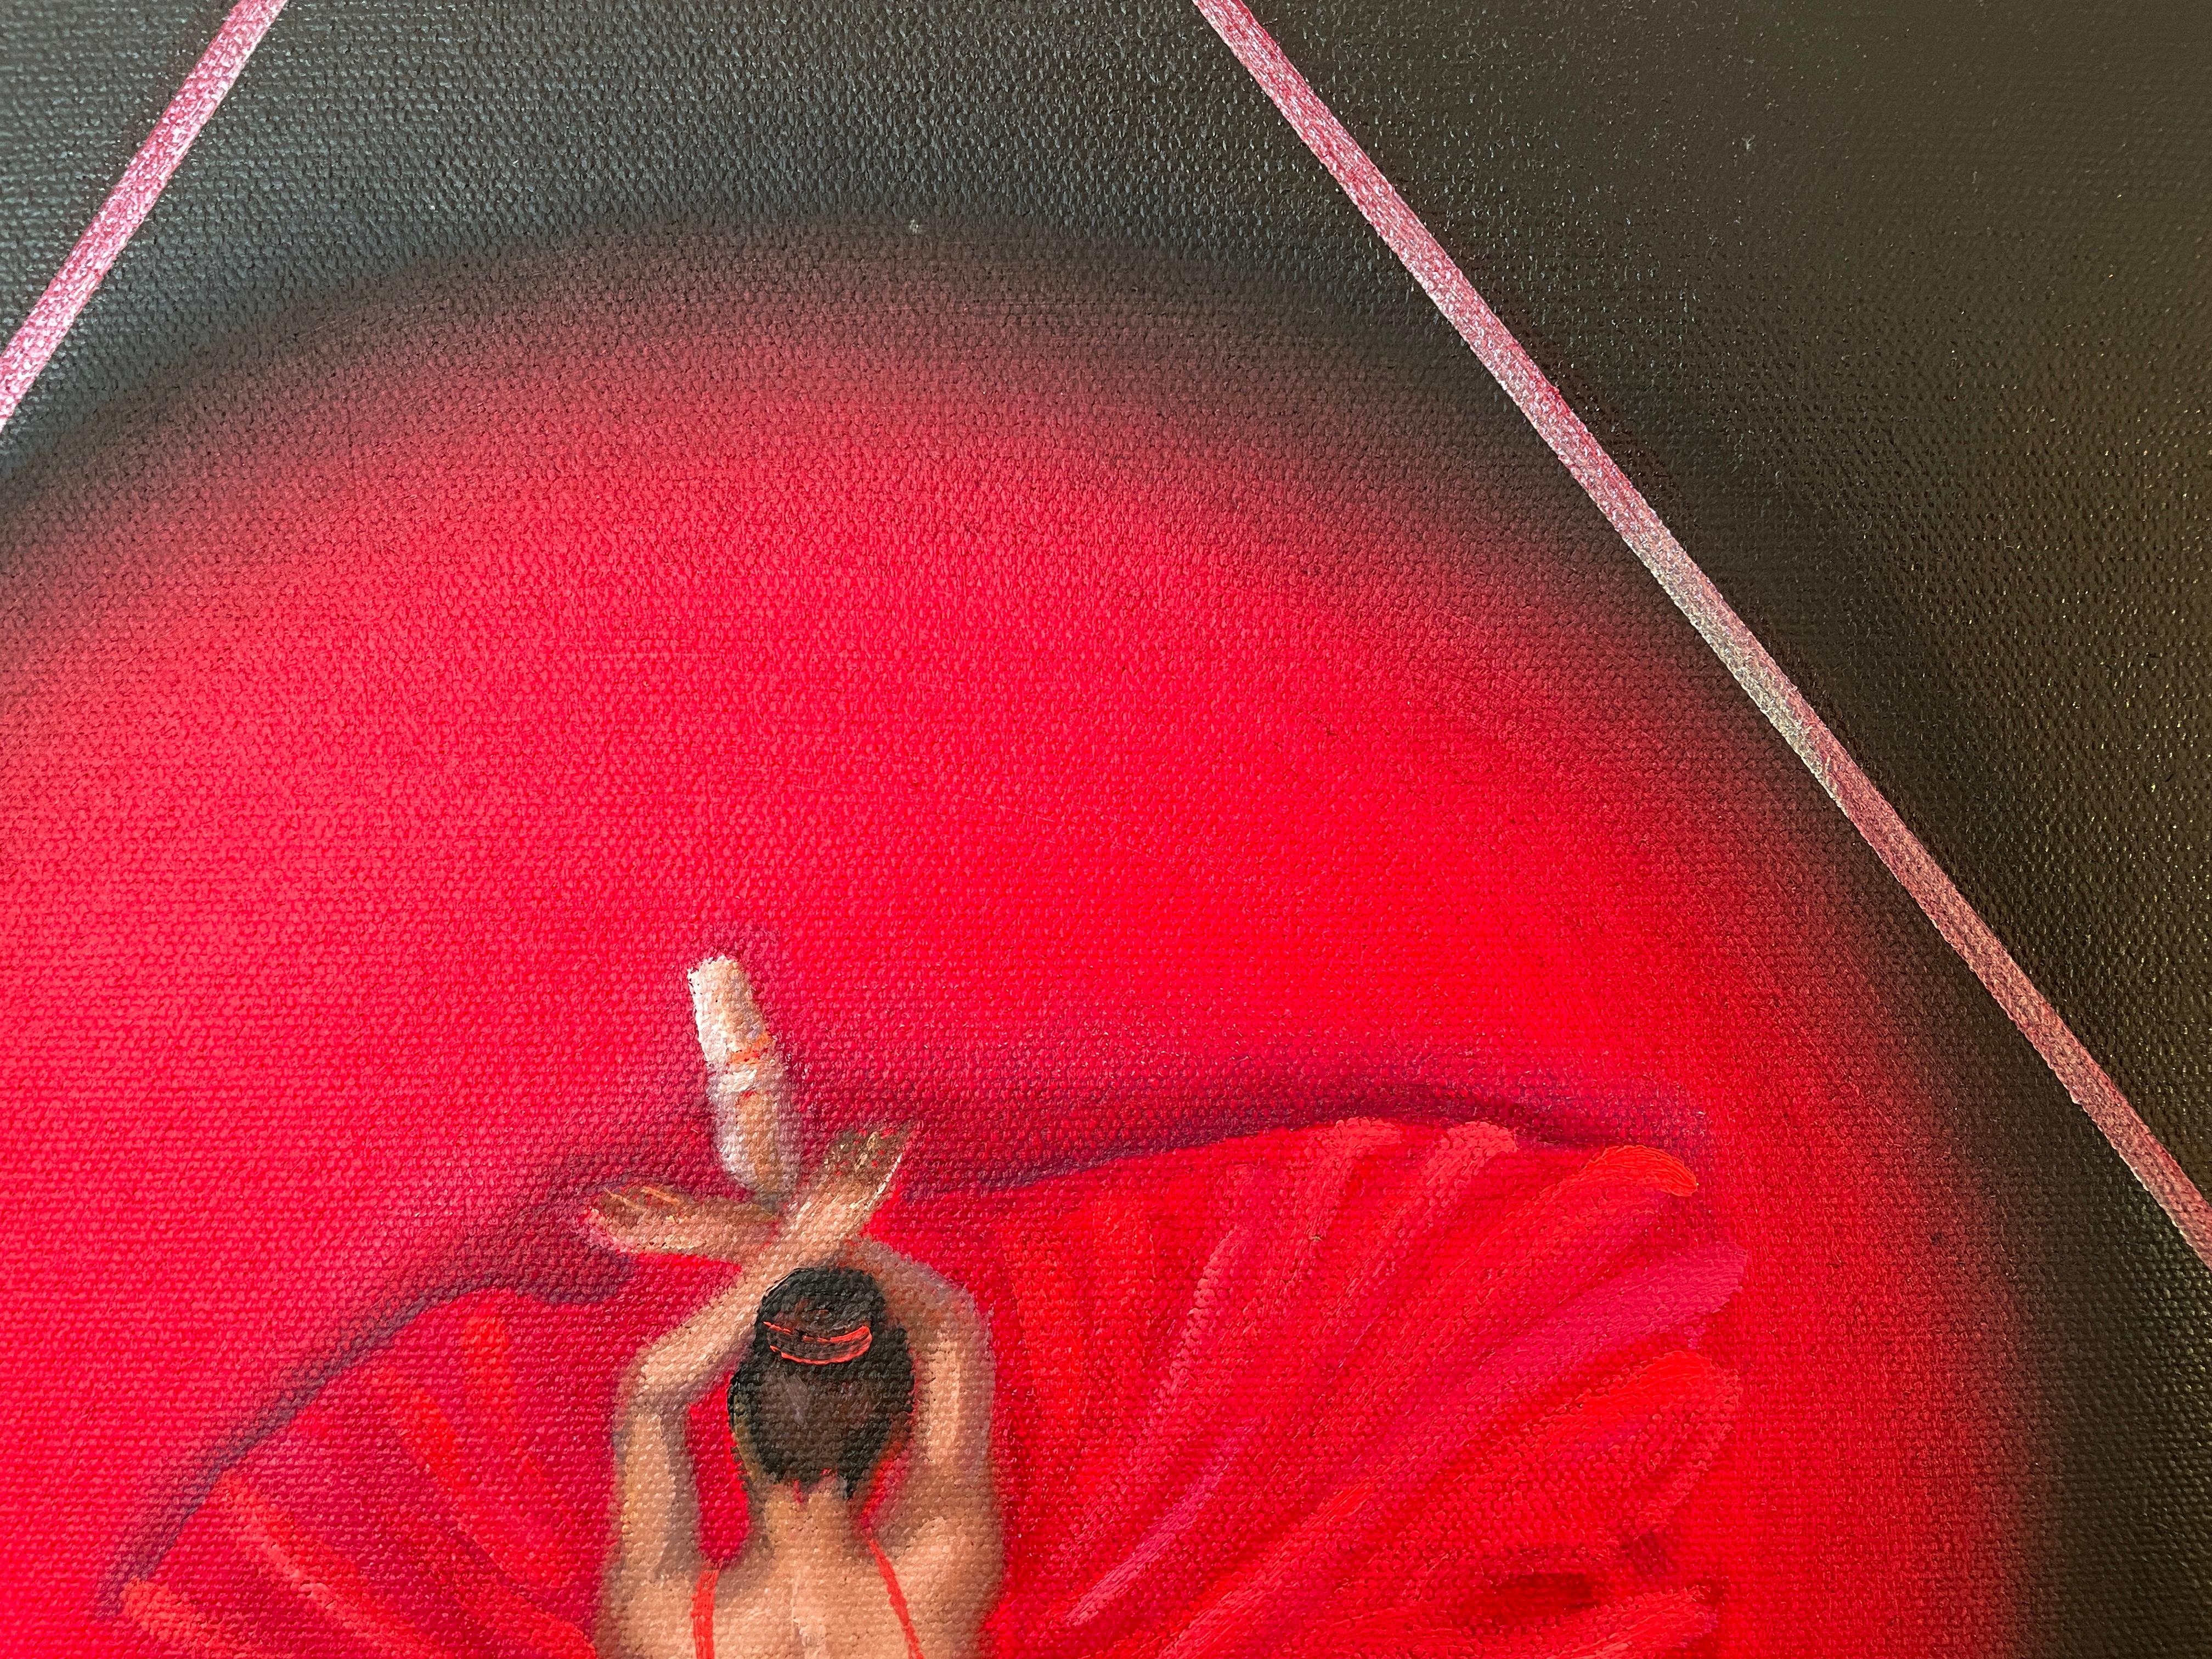 'Red Ballerina' - Small Figurative Ballet Dancer - Contemporary Oil Painting For Sale 2